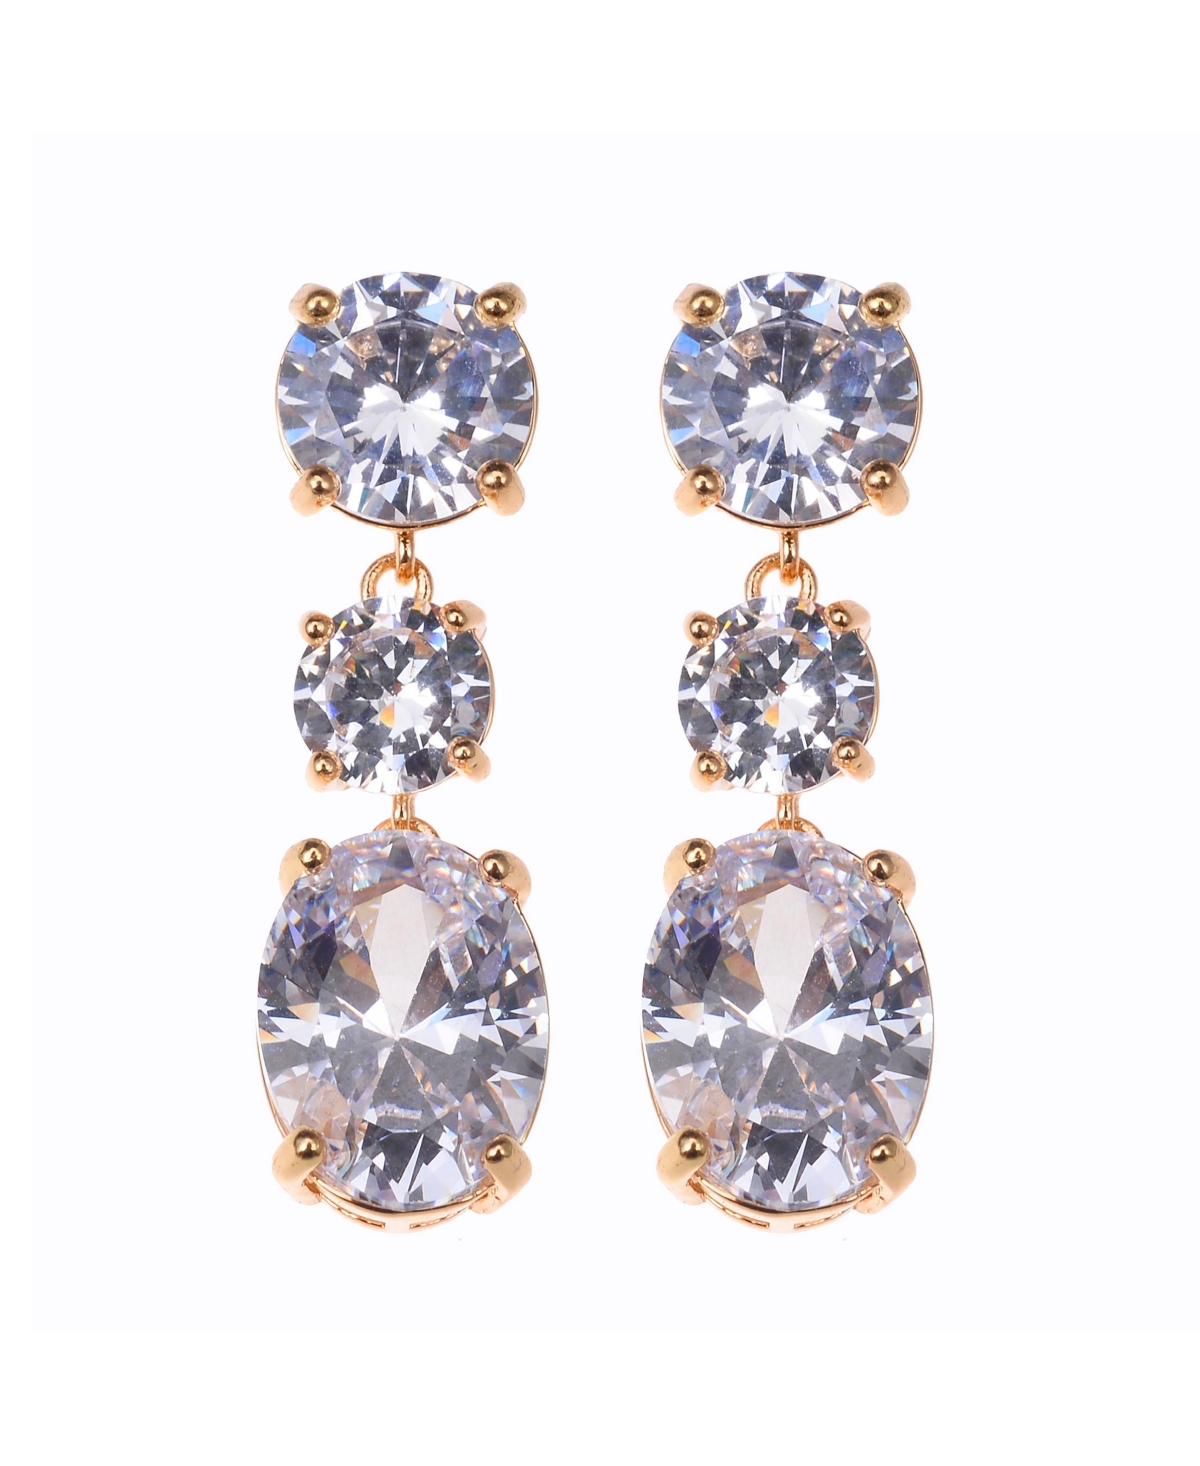 3- Crystal Stones with Gold-Tone Drop Earring - Gold-Tone, Crystal